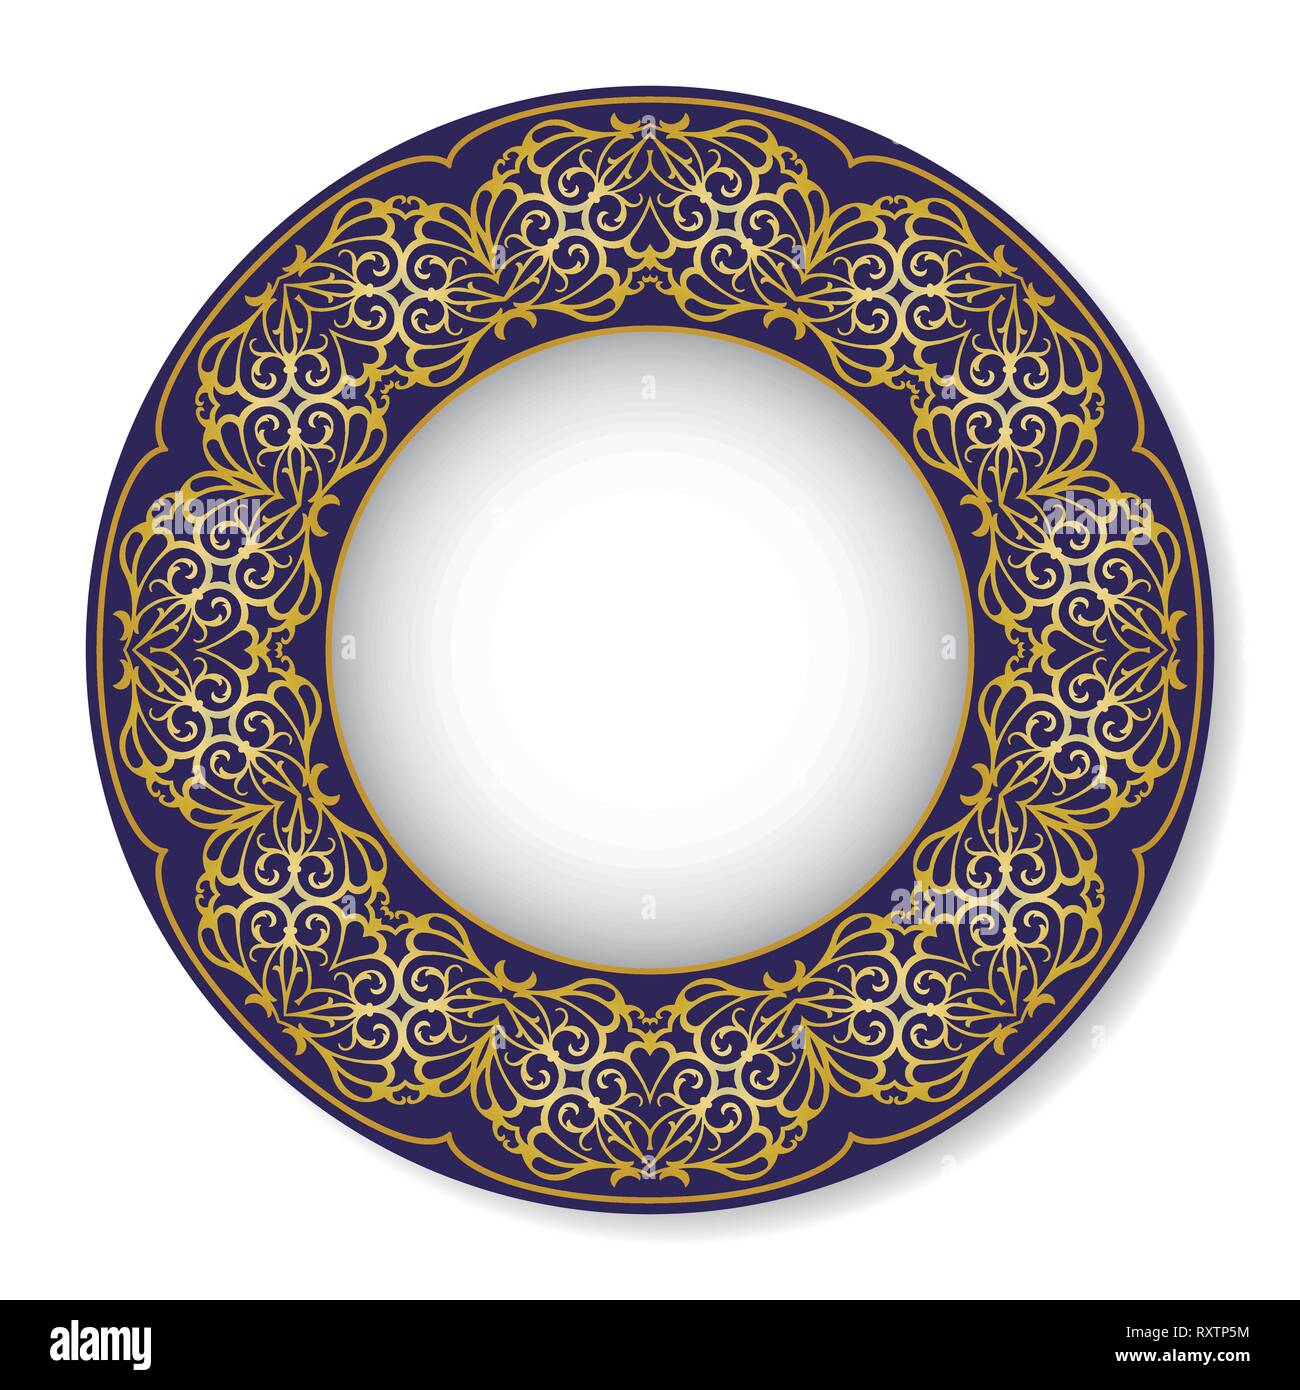 Vector illustration of a white and blue plate with gold pattern Stock Vector